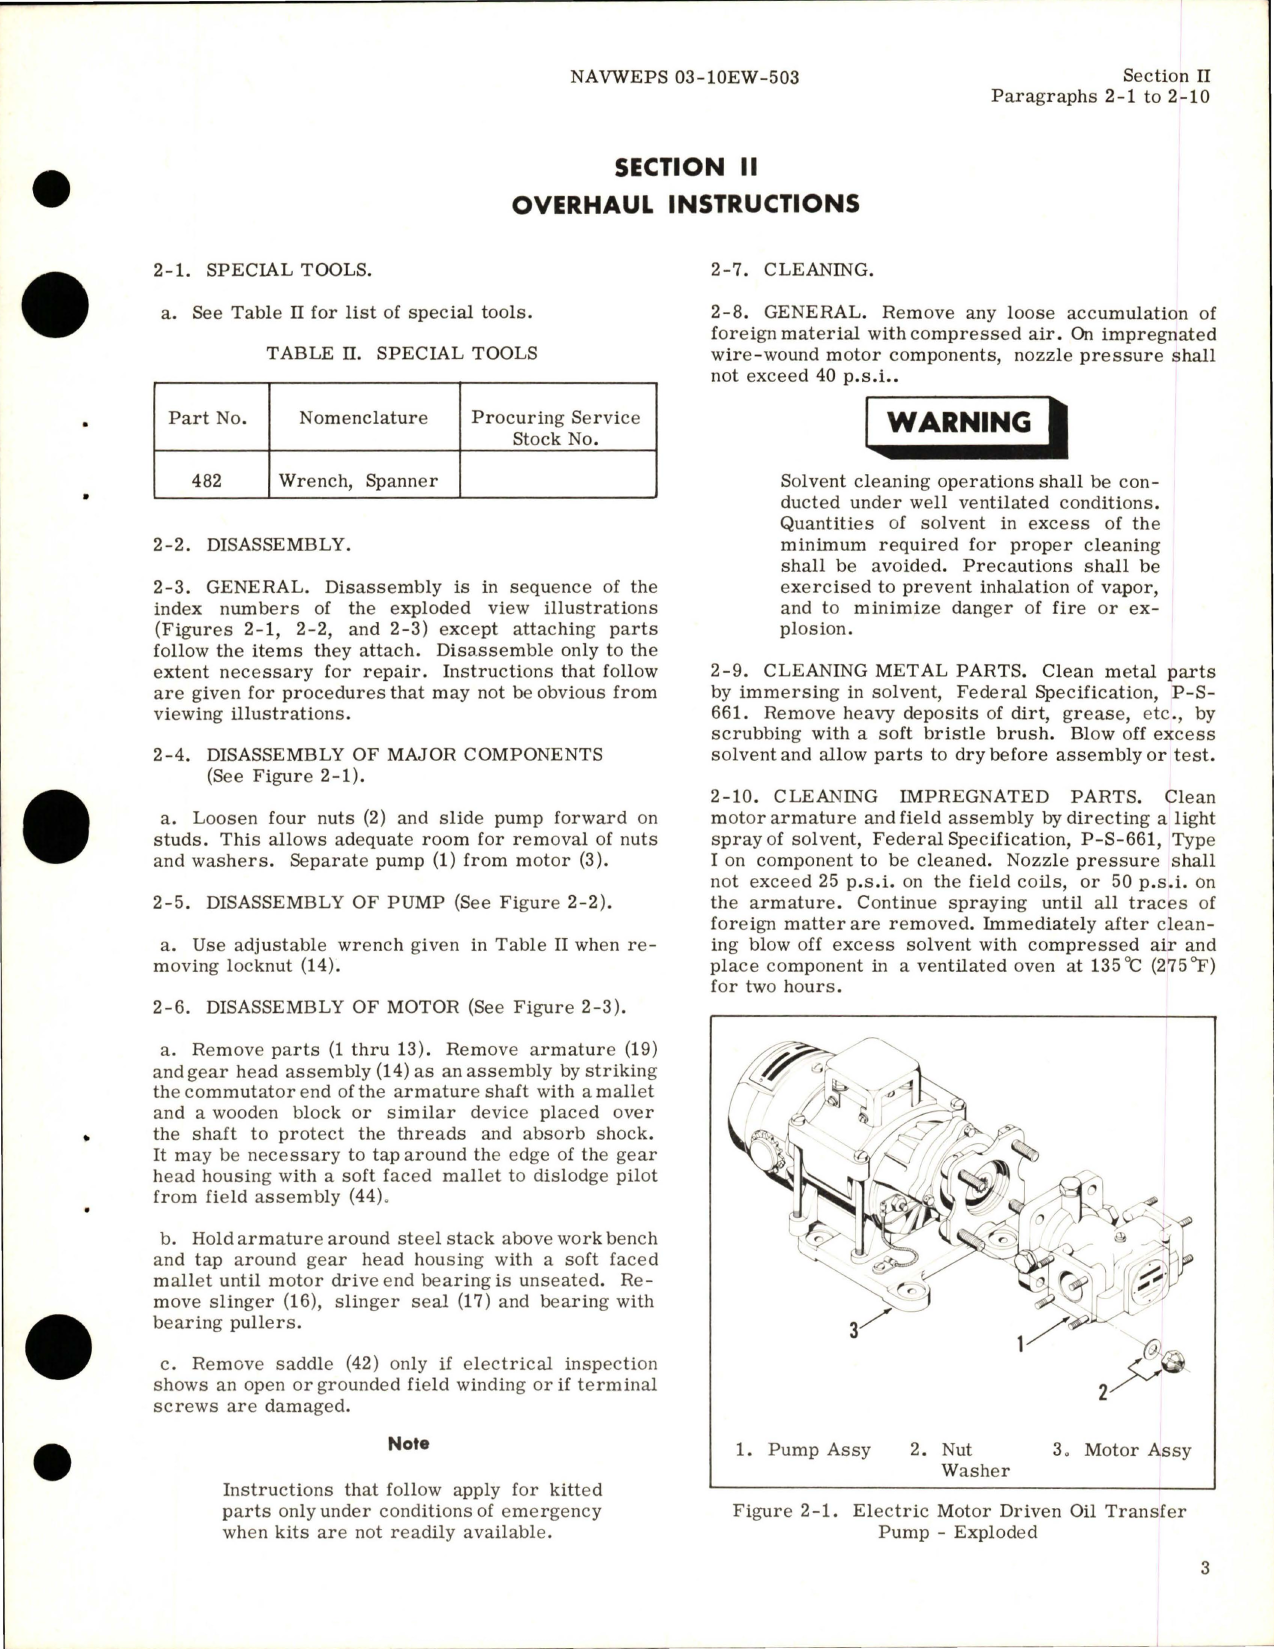 Sample page 5 from AirCorps Library document: Overhaul Instructions for Electric Motor Driven Oil Transfer Pump - Model RG984